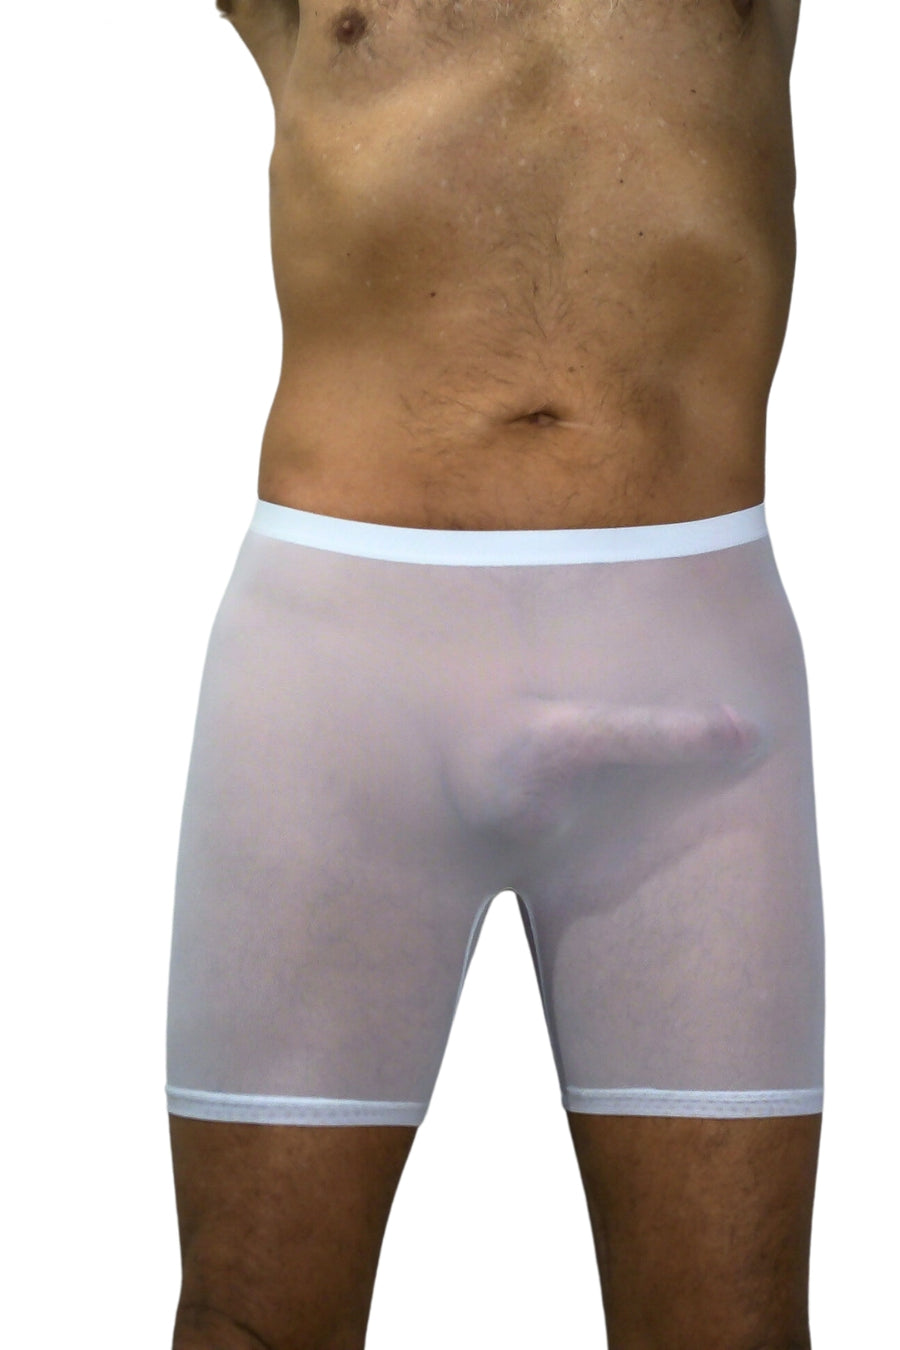 Bodywear for Men Ultra Sheer High Waist Boxer Shorts #BfM-1042 made from a fine poly blend sheer material. Our Sheer Boxer shorts sit high on your waist, 4' long legs, seamless front with a center seamed rear in White